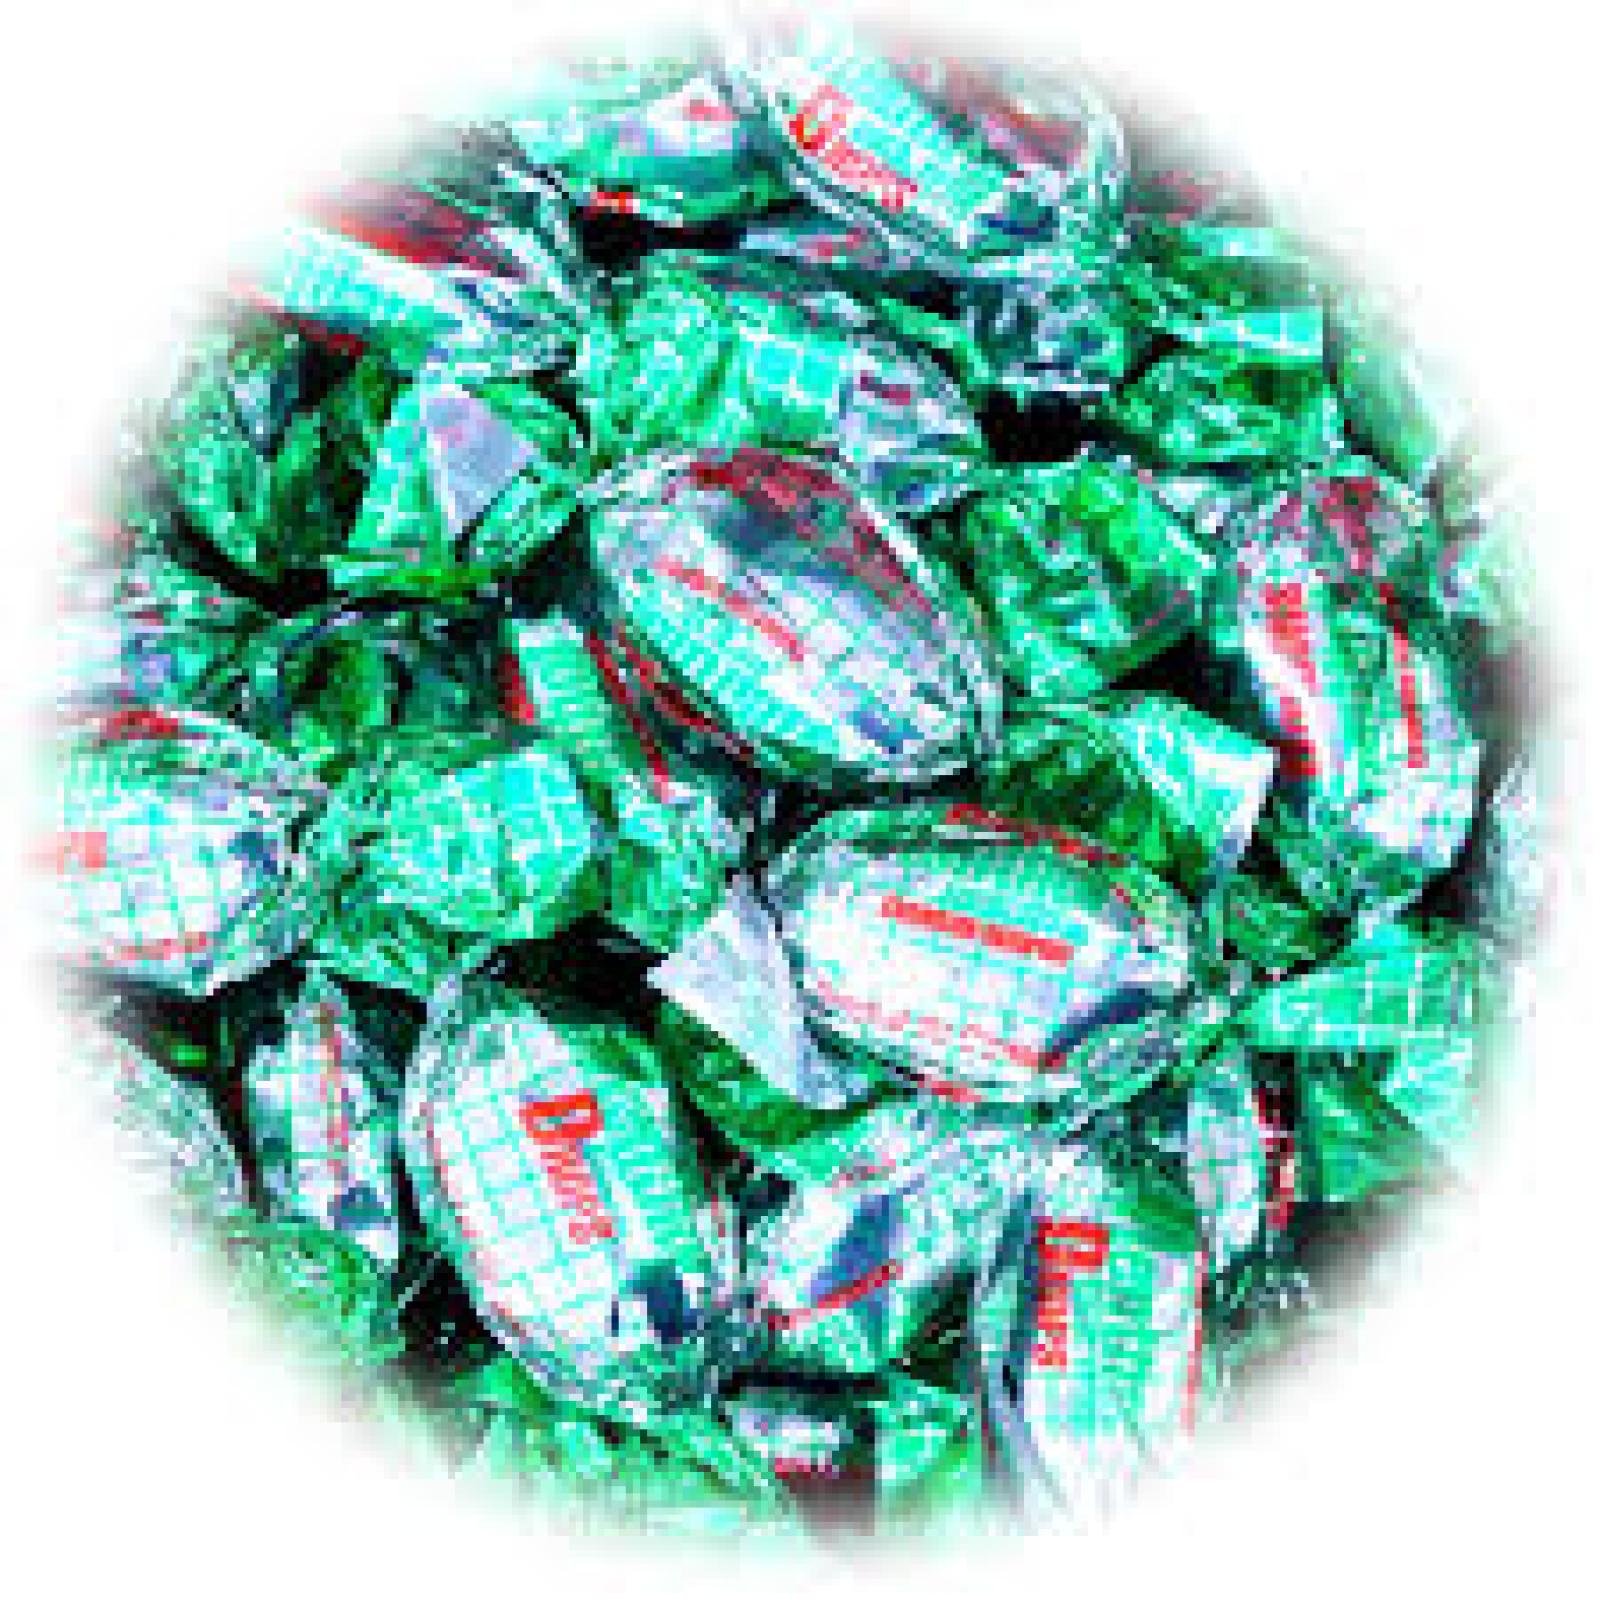 Kerr's Menthol Eucalyptus Candy, 5kg/11.03 lb {Imported from Canada} | eBay